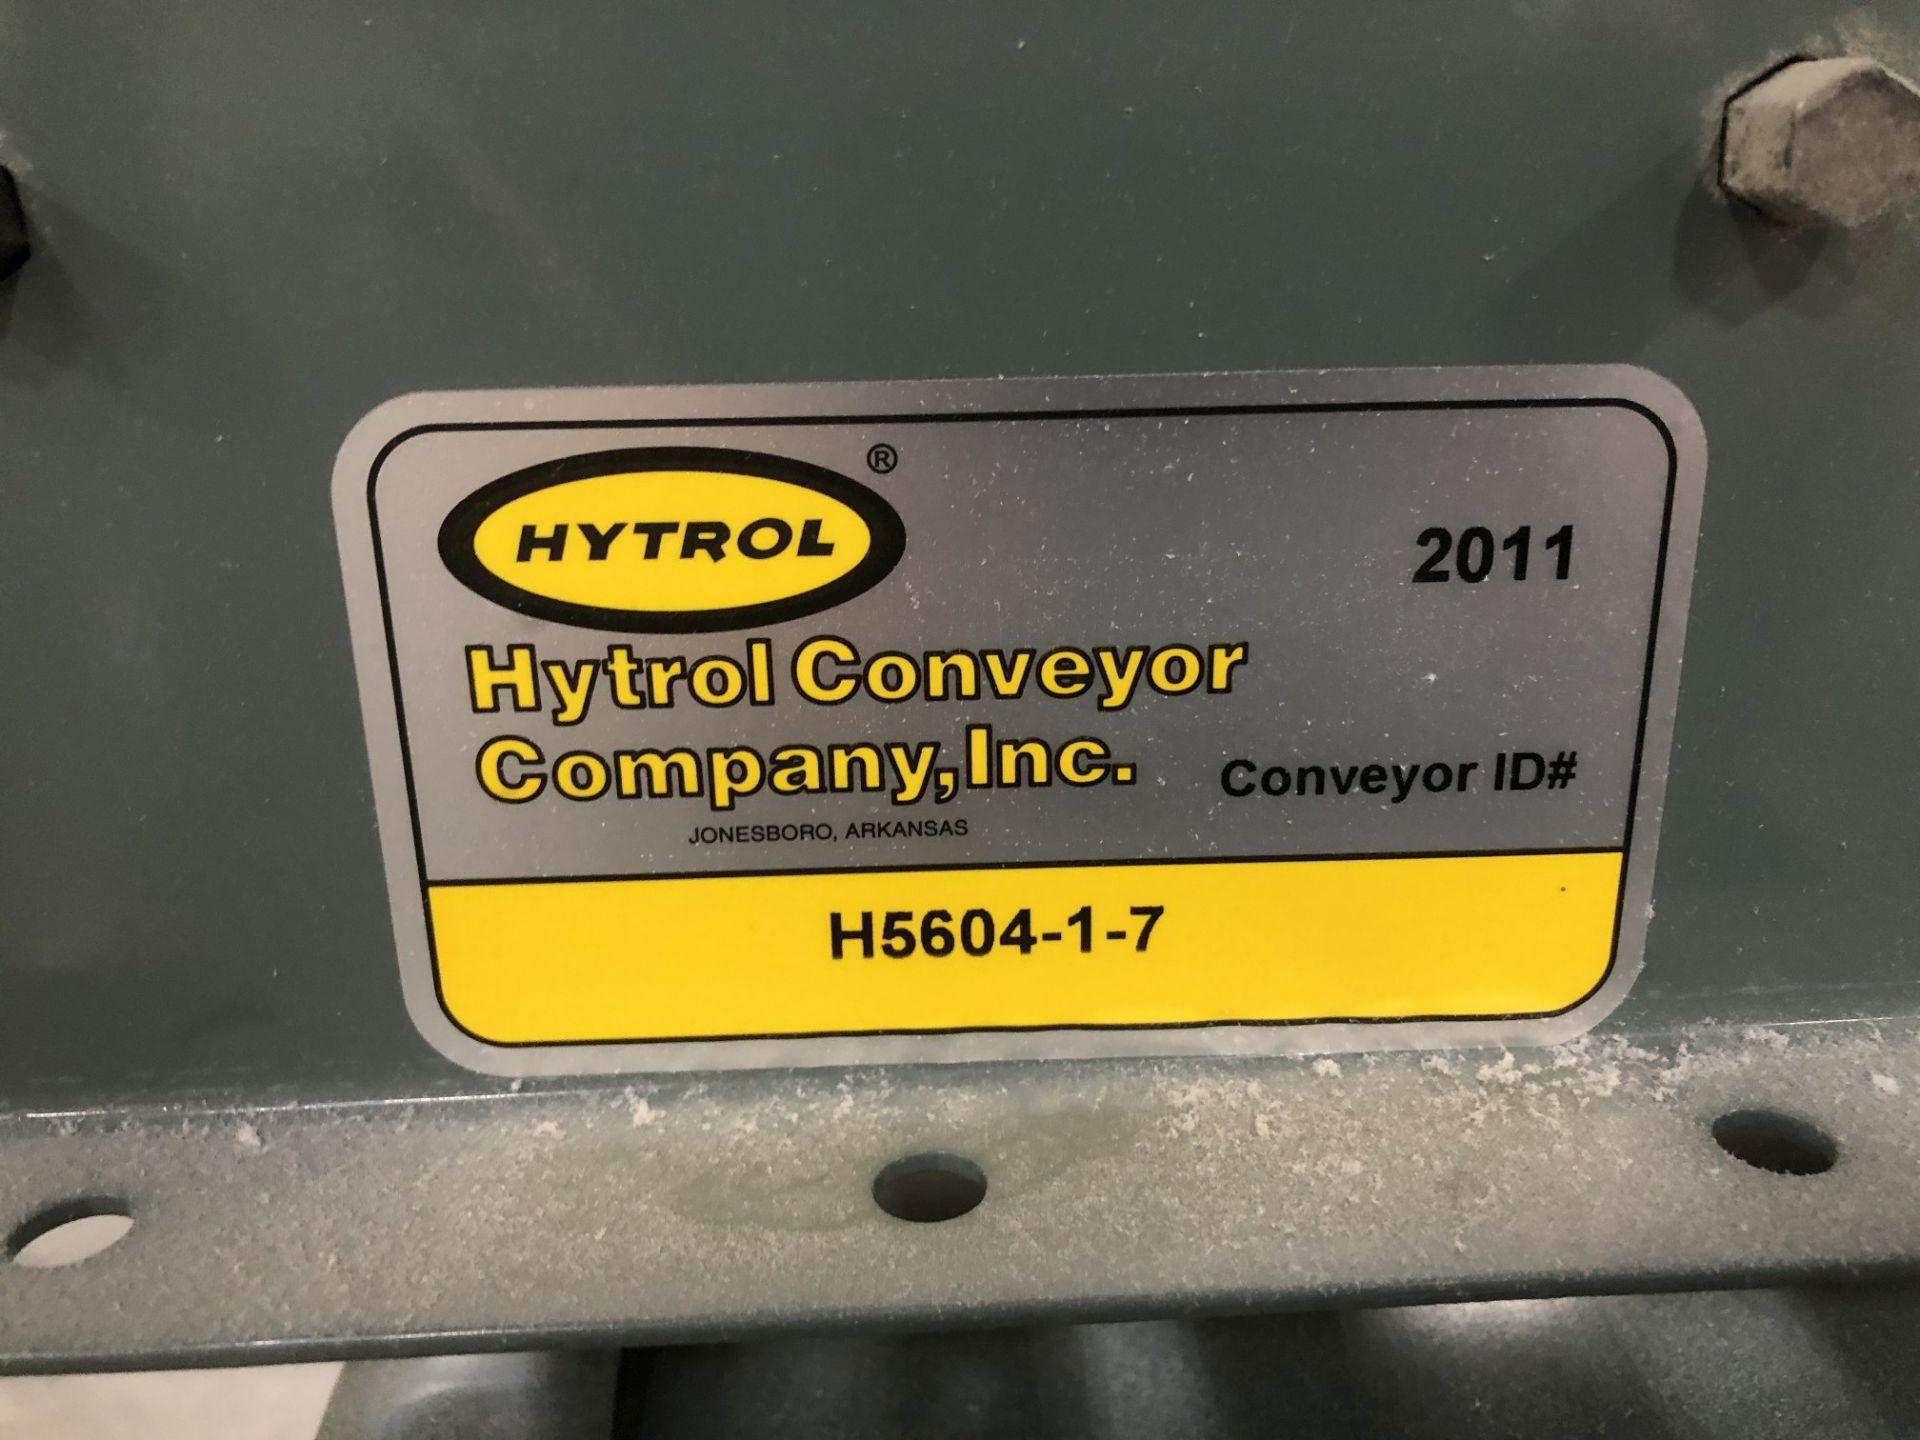 All Hytrol Conveyor Throughout Entire Site, Mostly 20" Wide Powered Roller Conveyor [Please - Image 48 of 80